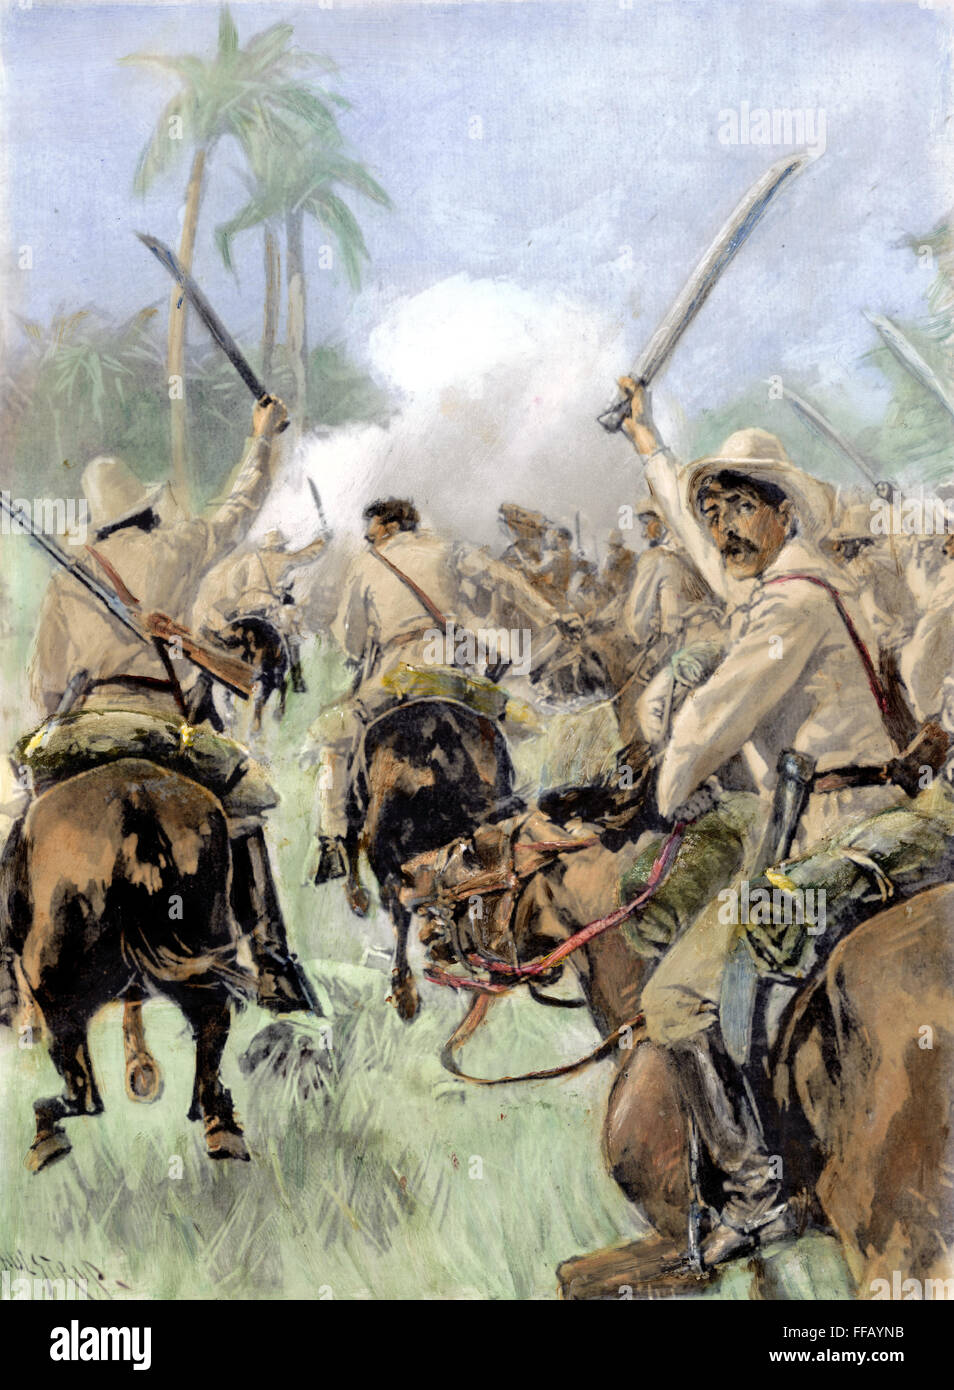 CUBA, 1896. /nInsurgent rebel cavalry armed with machetes charging Spanish regulars. Drawing by Thure de Thulstrup from an American newspaper, 1896. Stock Photo